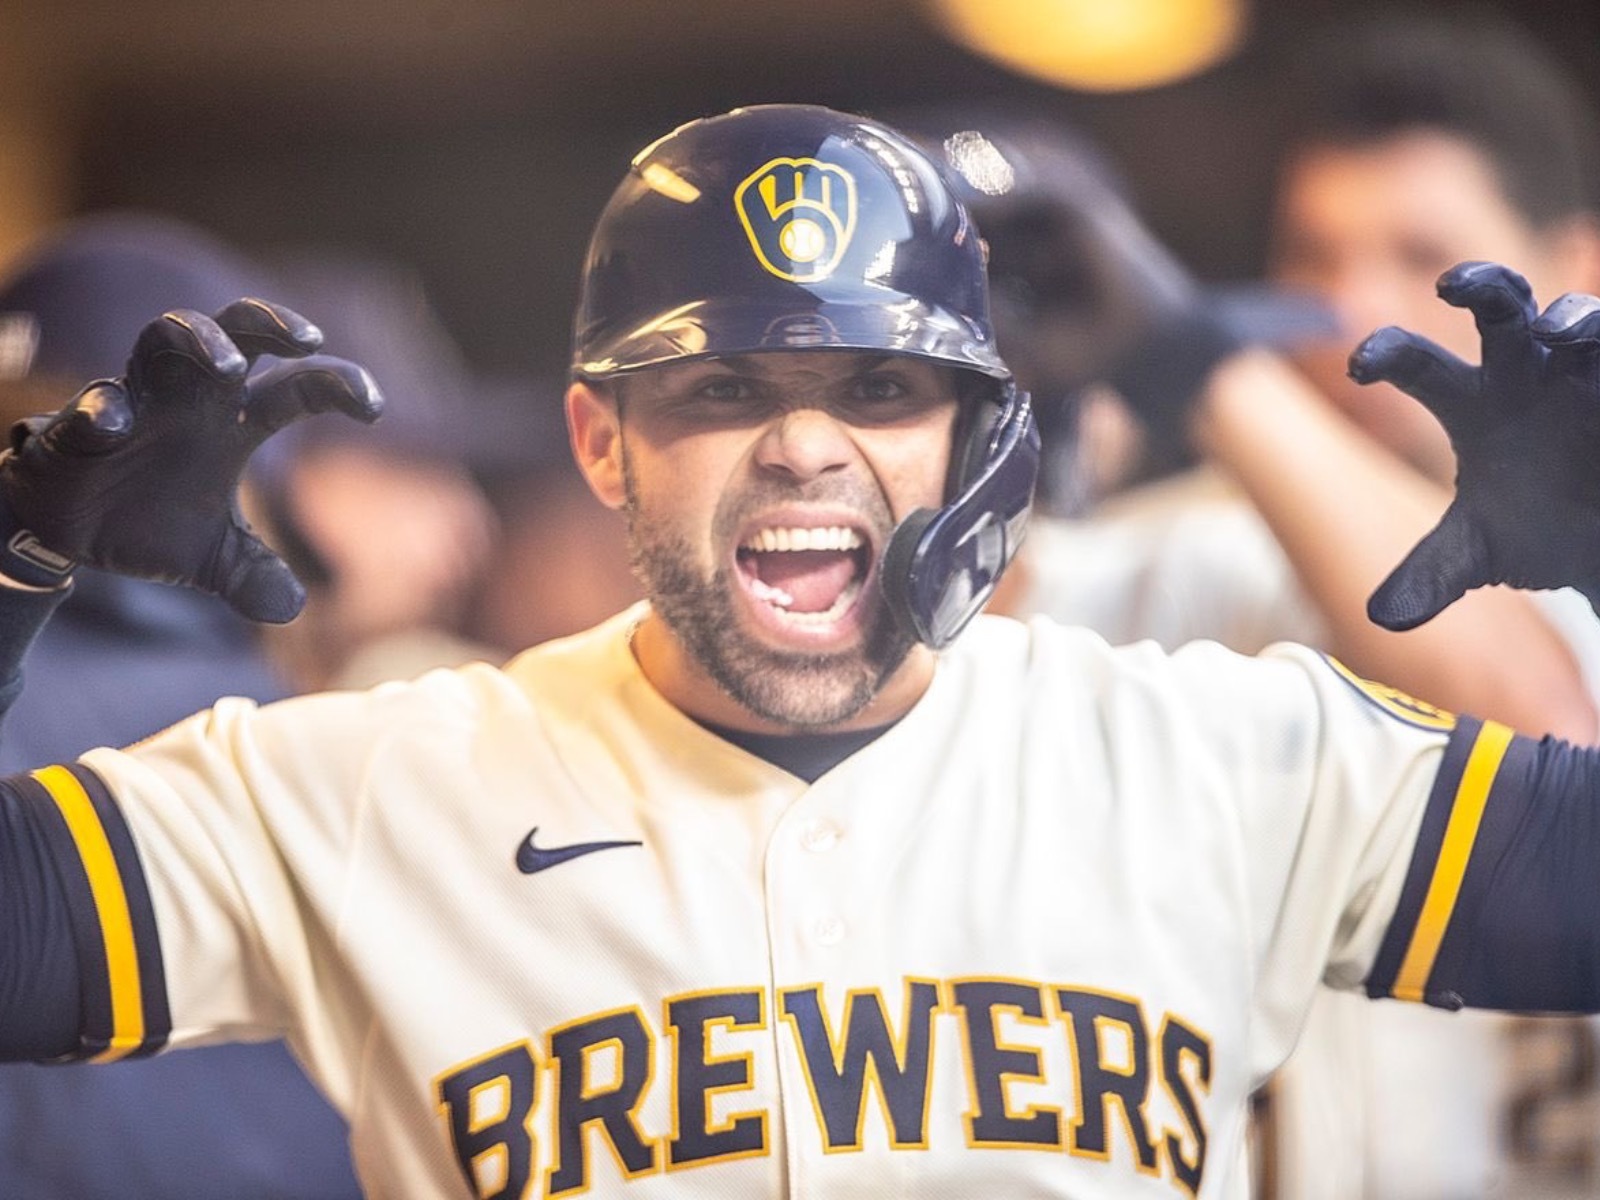 How to watch the Brewers in the MLB playoffs (even if you've cut